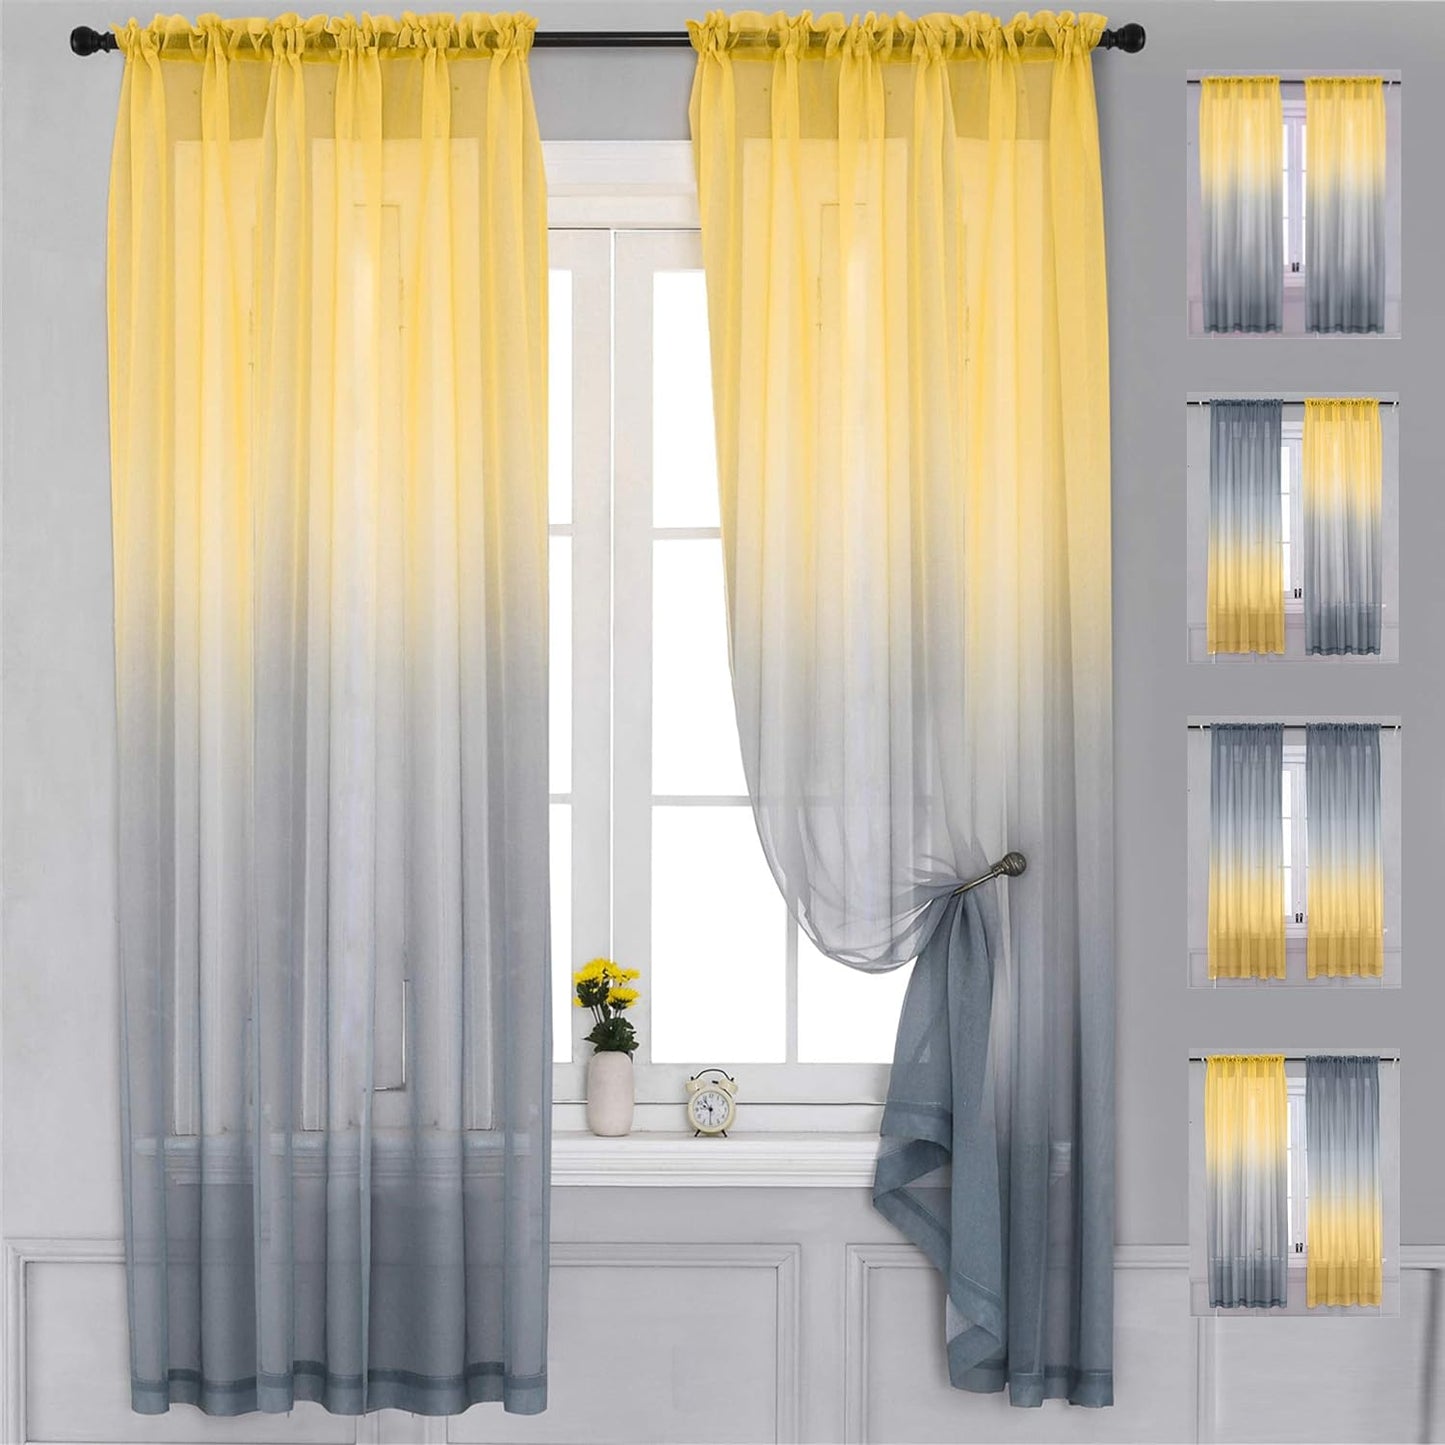 Yancorp 2 Panel Sets Semi Bedroom Curtains 63 Inch Length Sheer Rod Pocket Curtain Linen Teal Turquoise Purple Ombre Girls Living Room Mermaid Bedroom Nursery Kids Decor (Turquoise Purple, 40"X63")  Yancorp Yellow Grey 52"X84" 